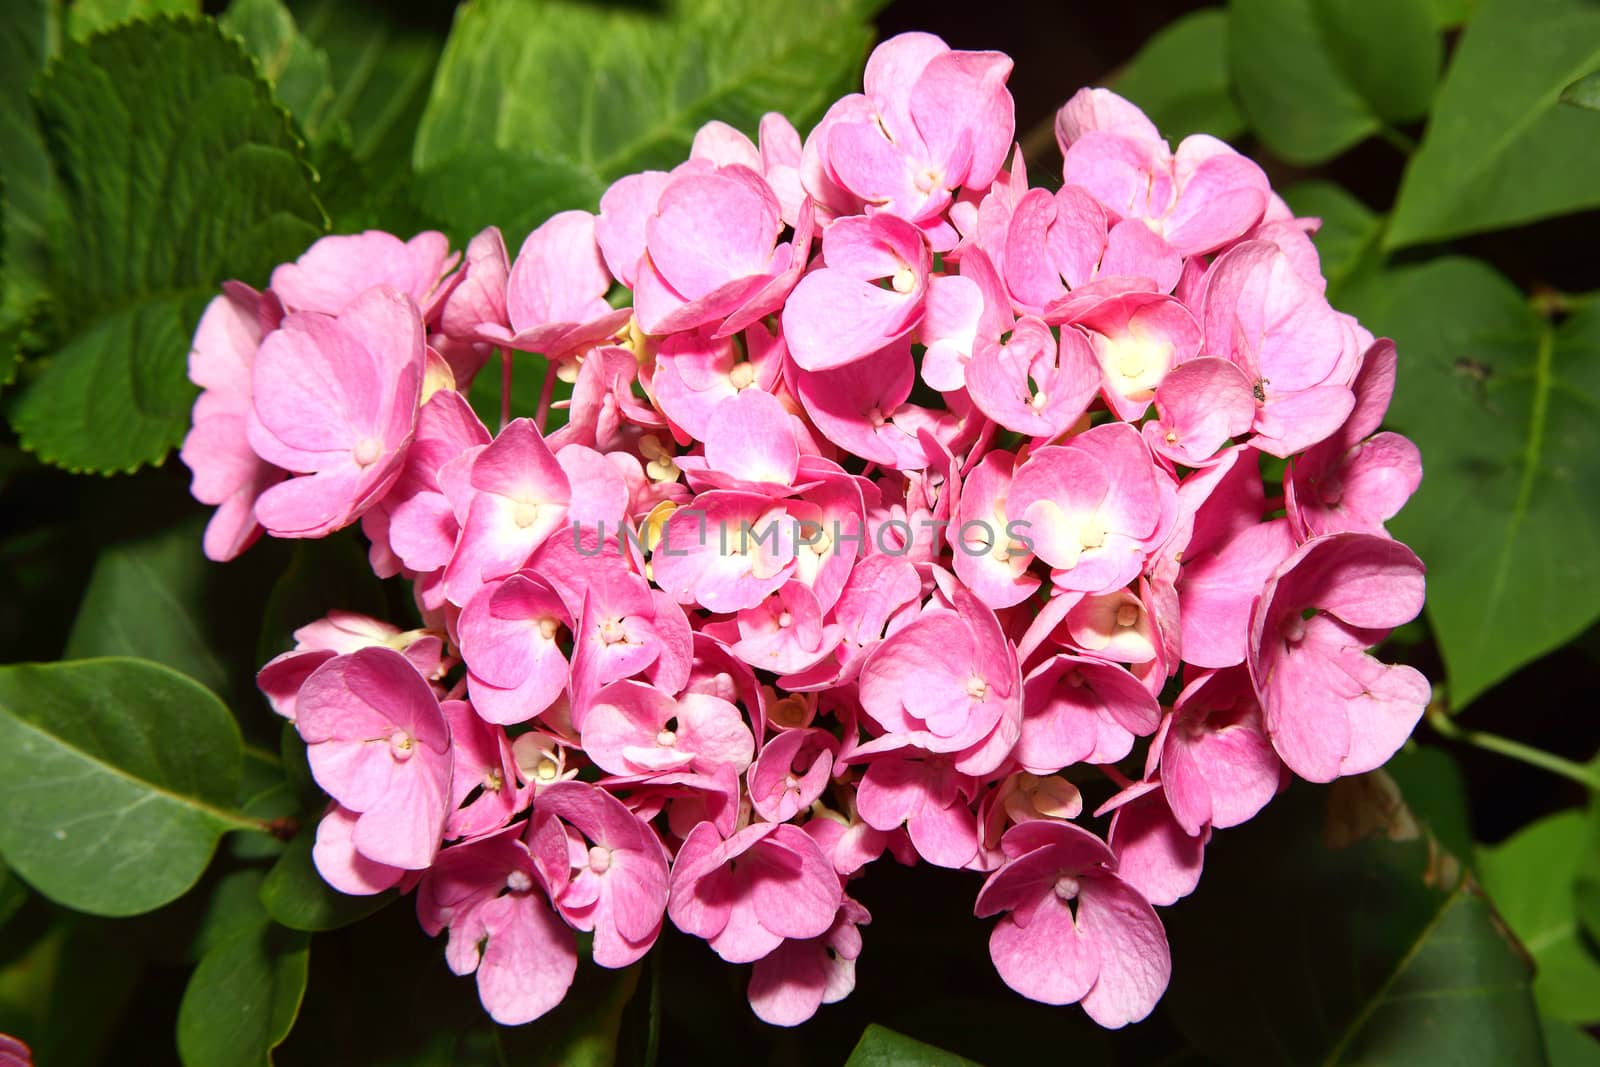 Pink hydrangea macrophylla in full flower blossom which is a spring and summer flowering shrub perennial herbaceous flower plant